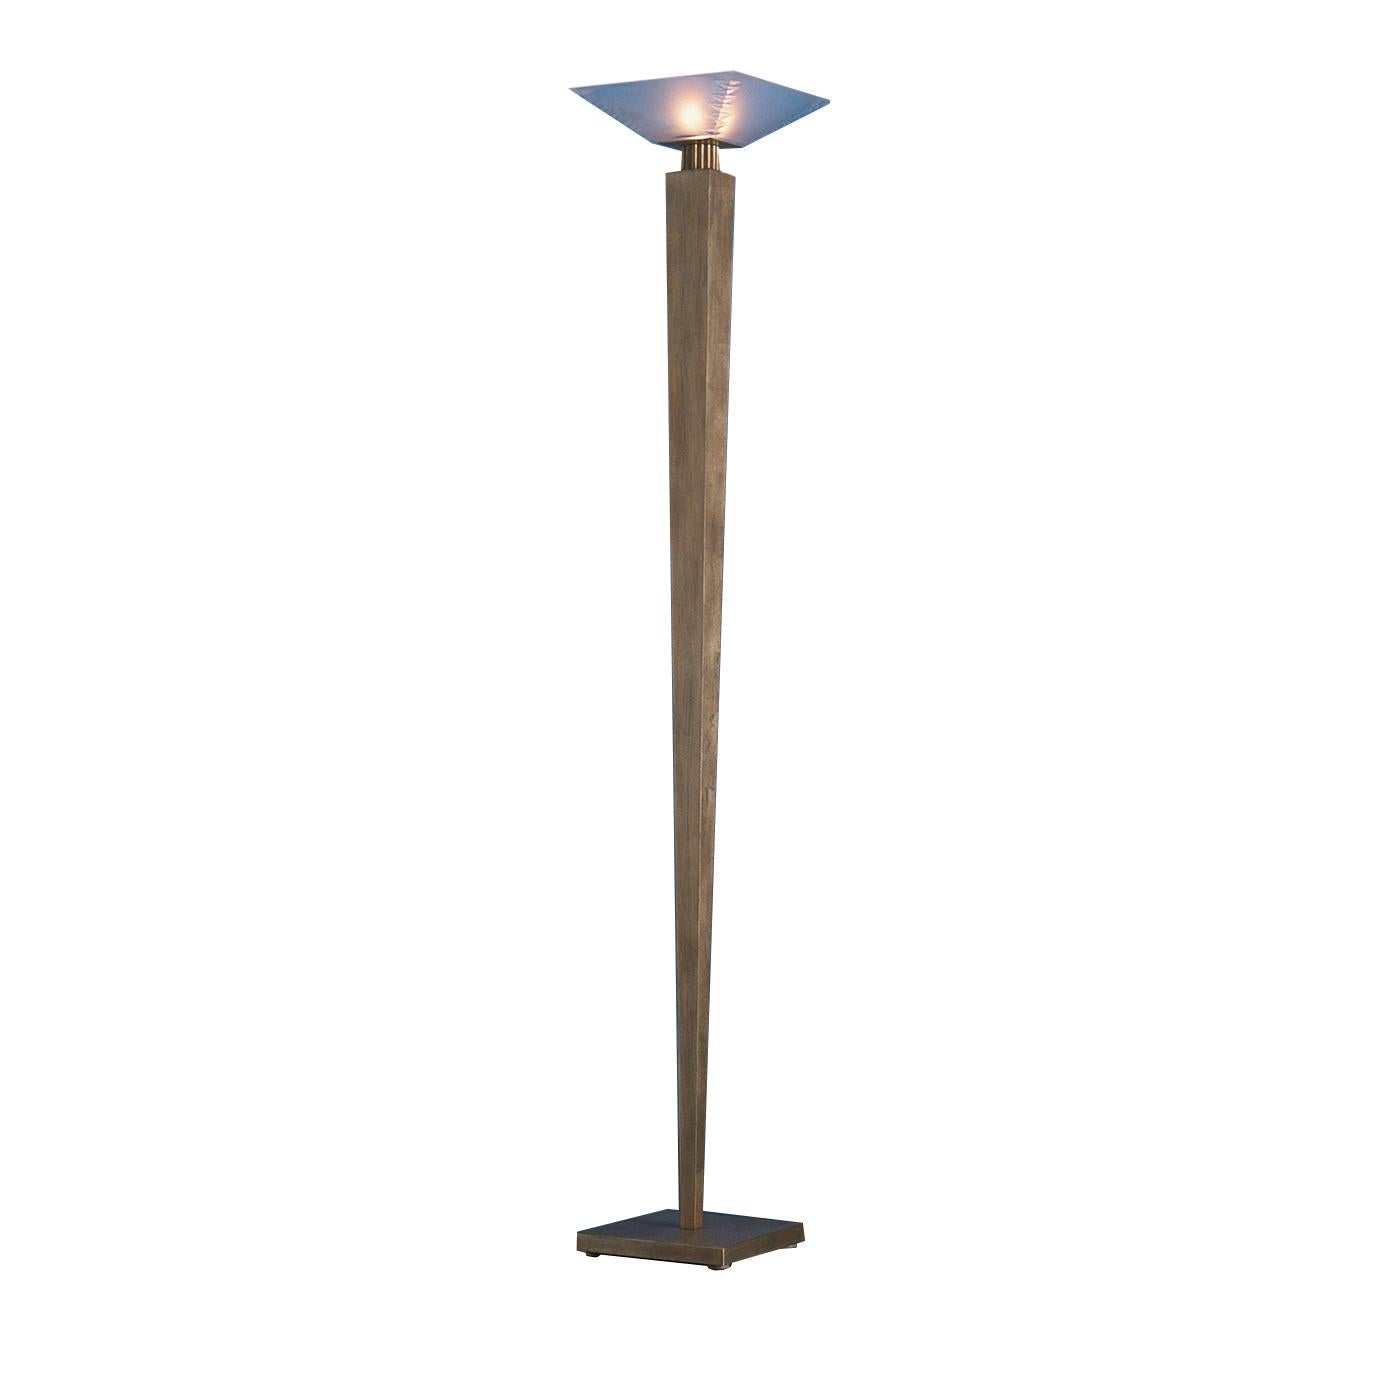 This magnificent floor lamp is a superb example of modern design and traditional craftsmanship. Its square base supports a long stem that tapered at the bottom towards the base. The hand forged iron structure has a striking, aged-gold finish that